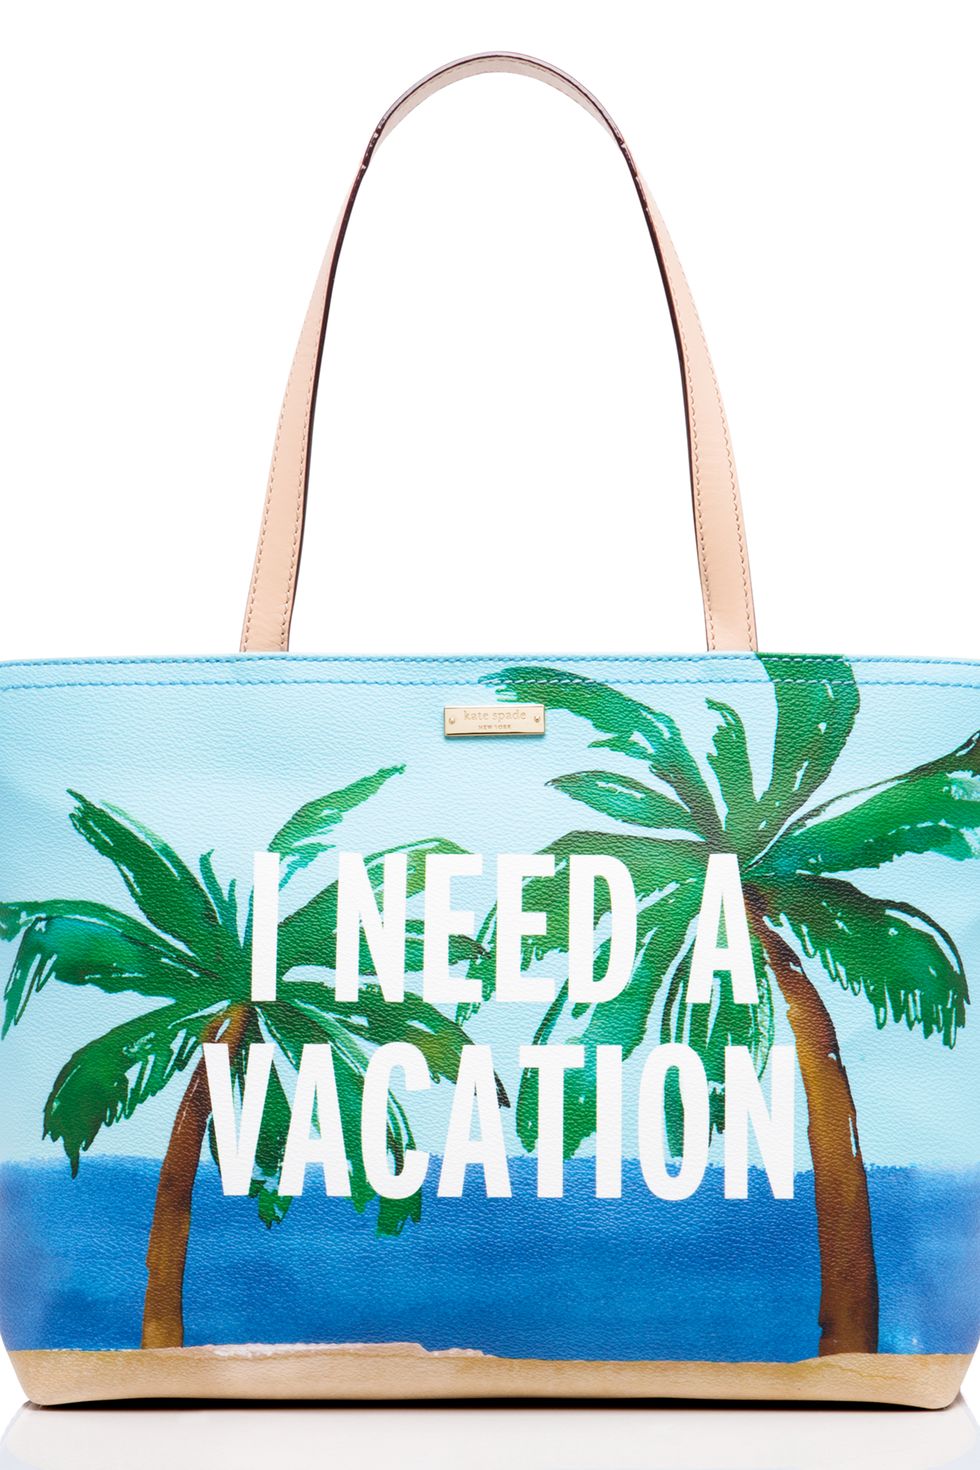 Bag, Style, Beauty, Azure, Aqua, Shoulder bag, Luggage and bags, Turquoise, Tote bag, Arecales, 